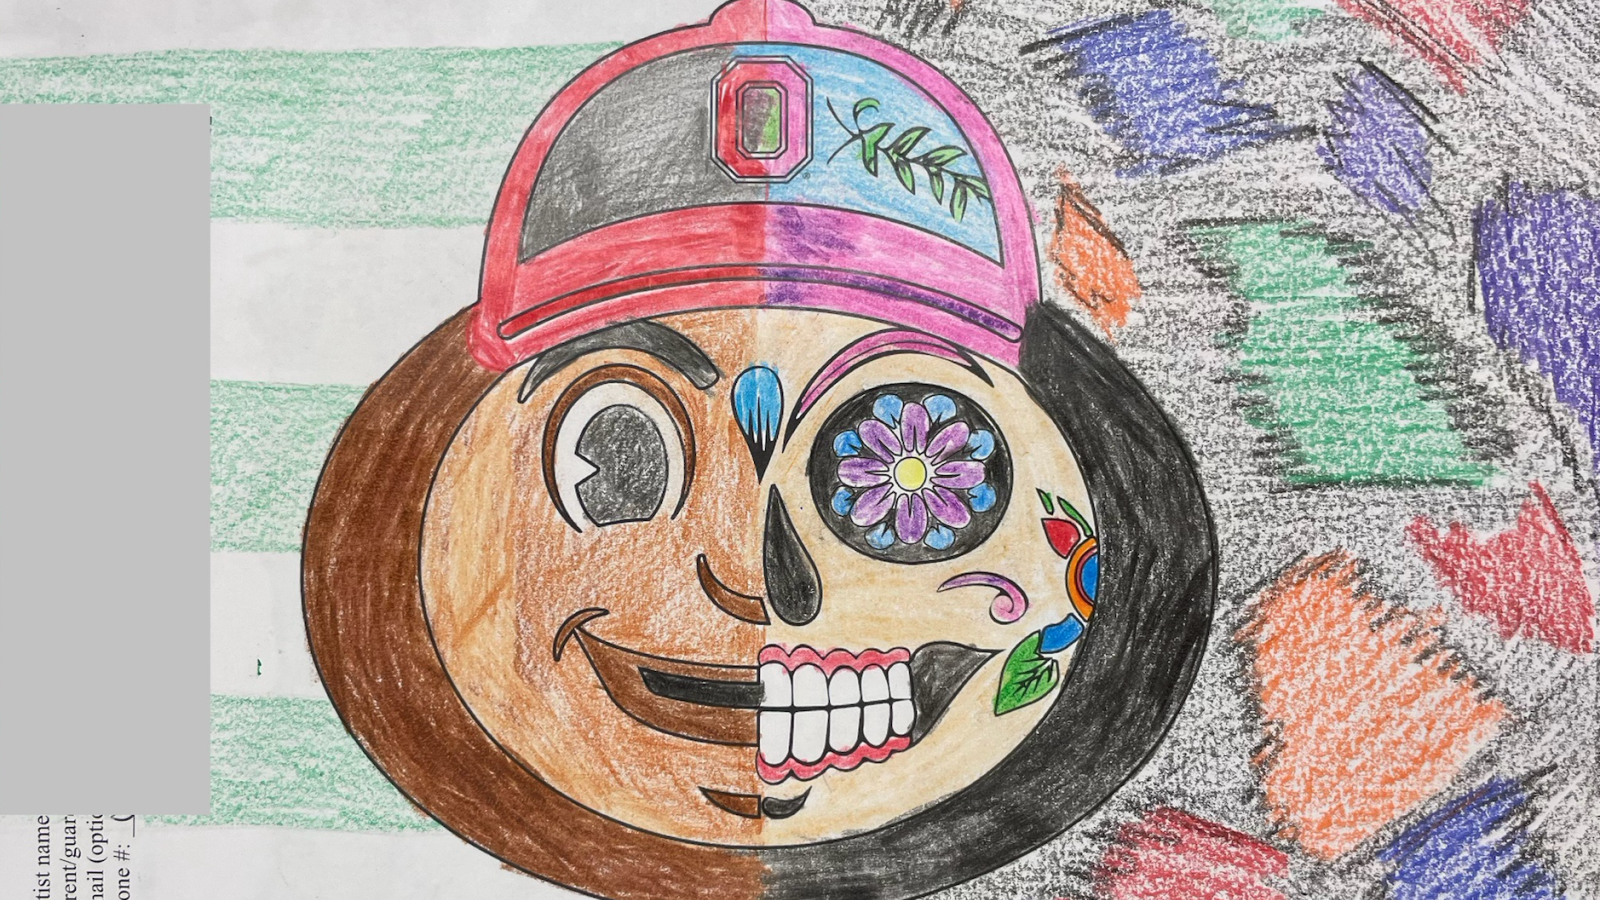 The Brutus Coloring Contest image of half brutus, half sugar skull, with the image hand-colored in with crayons and/or markers